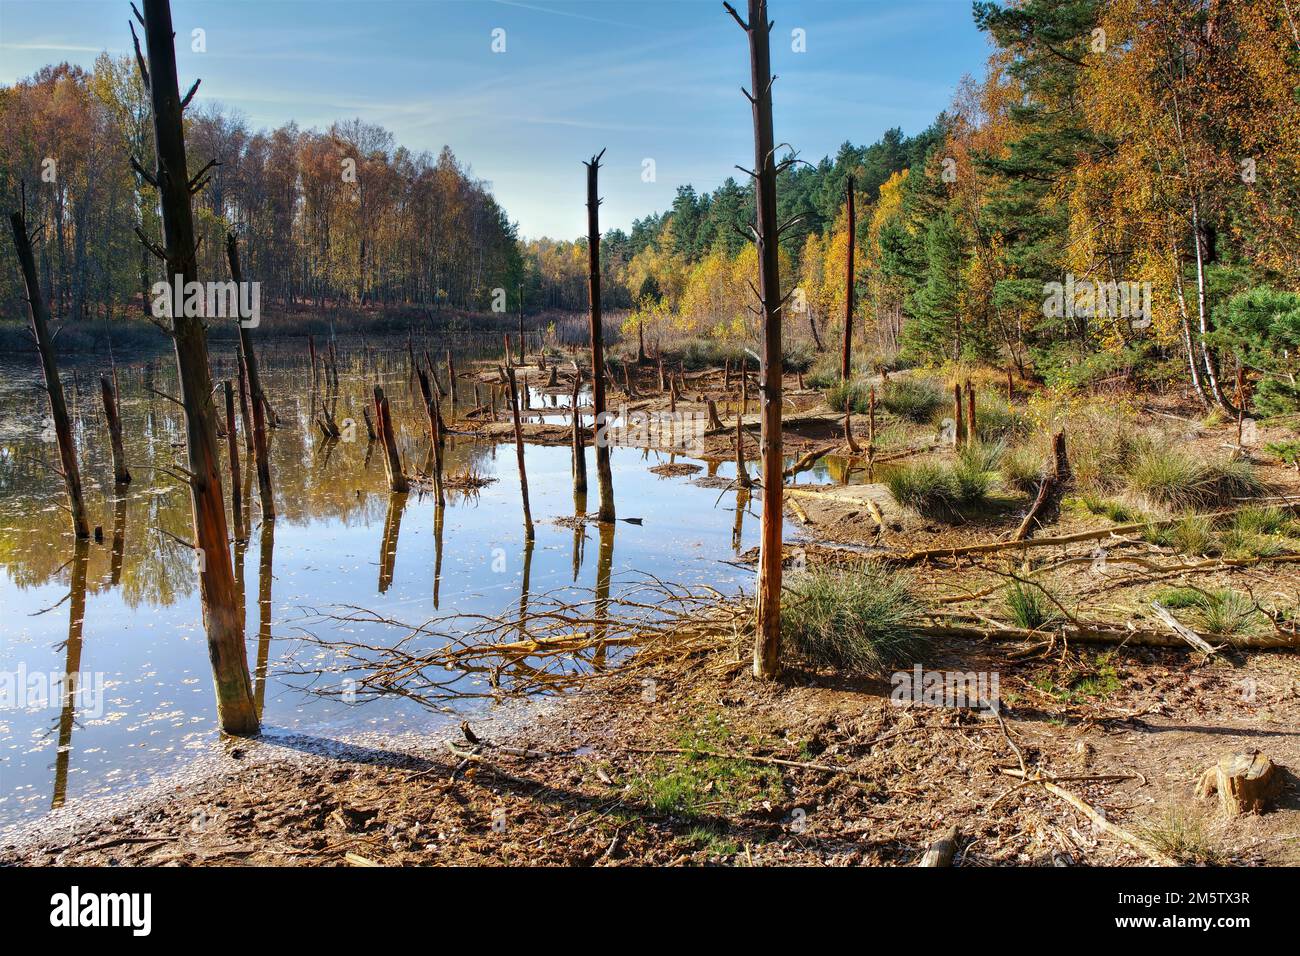 a sunken forest in the swamp, tree stumps look out of the water Stock Photo